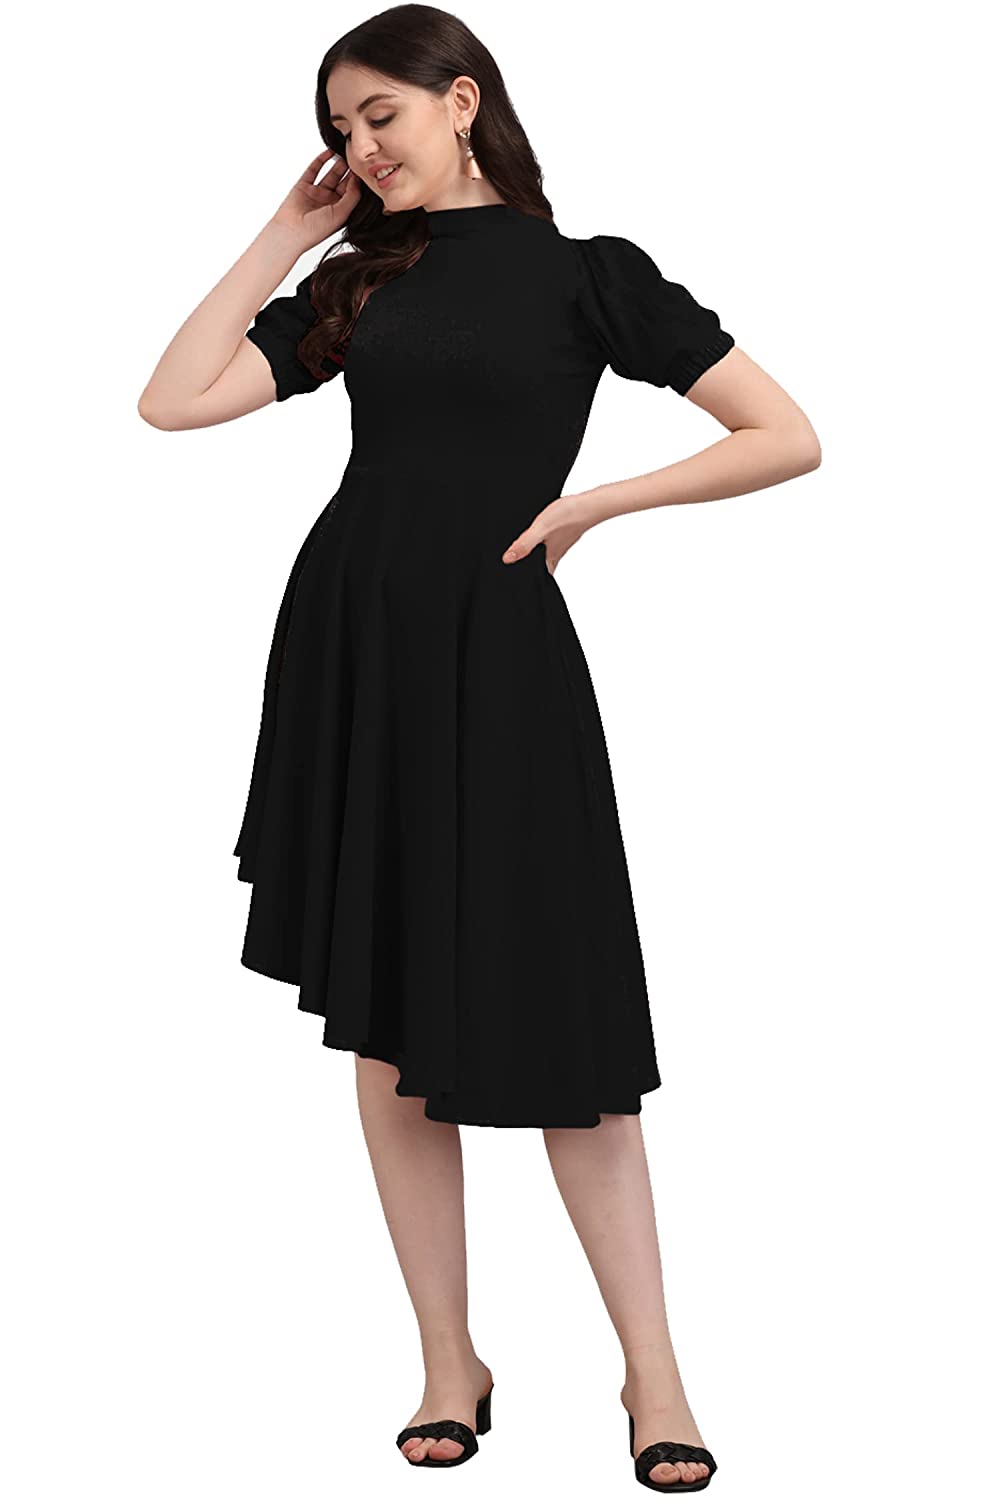 PURVAJA Women’s High-Low Knee Length Dress -  Dresses in Sri Lanka from Arcade Online Shopping - Just Rs. 4699!